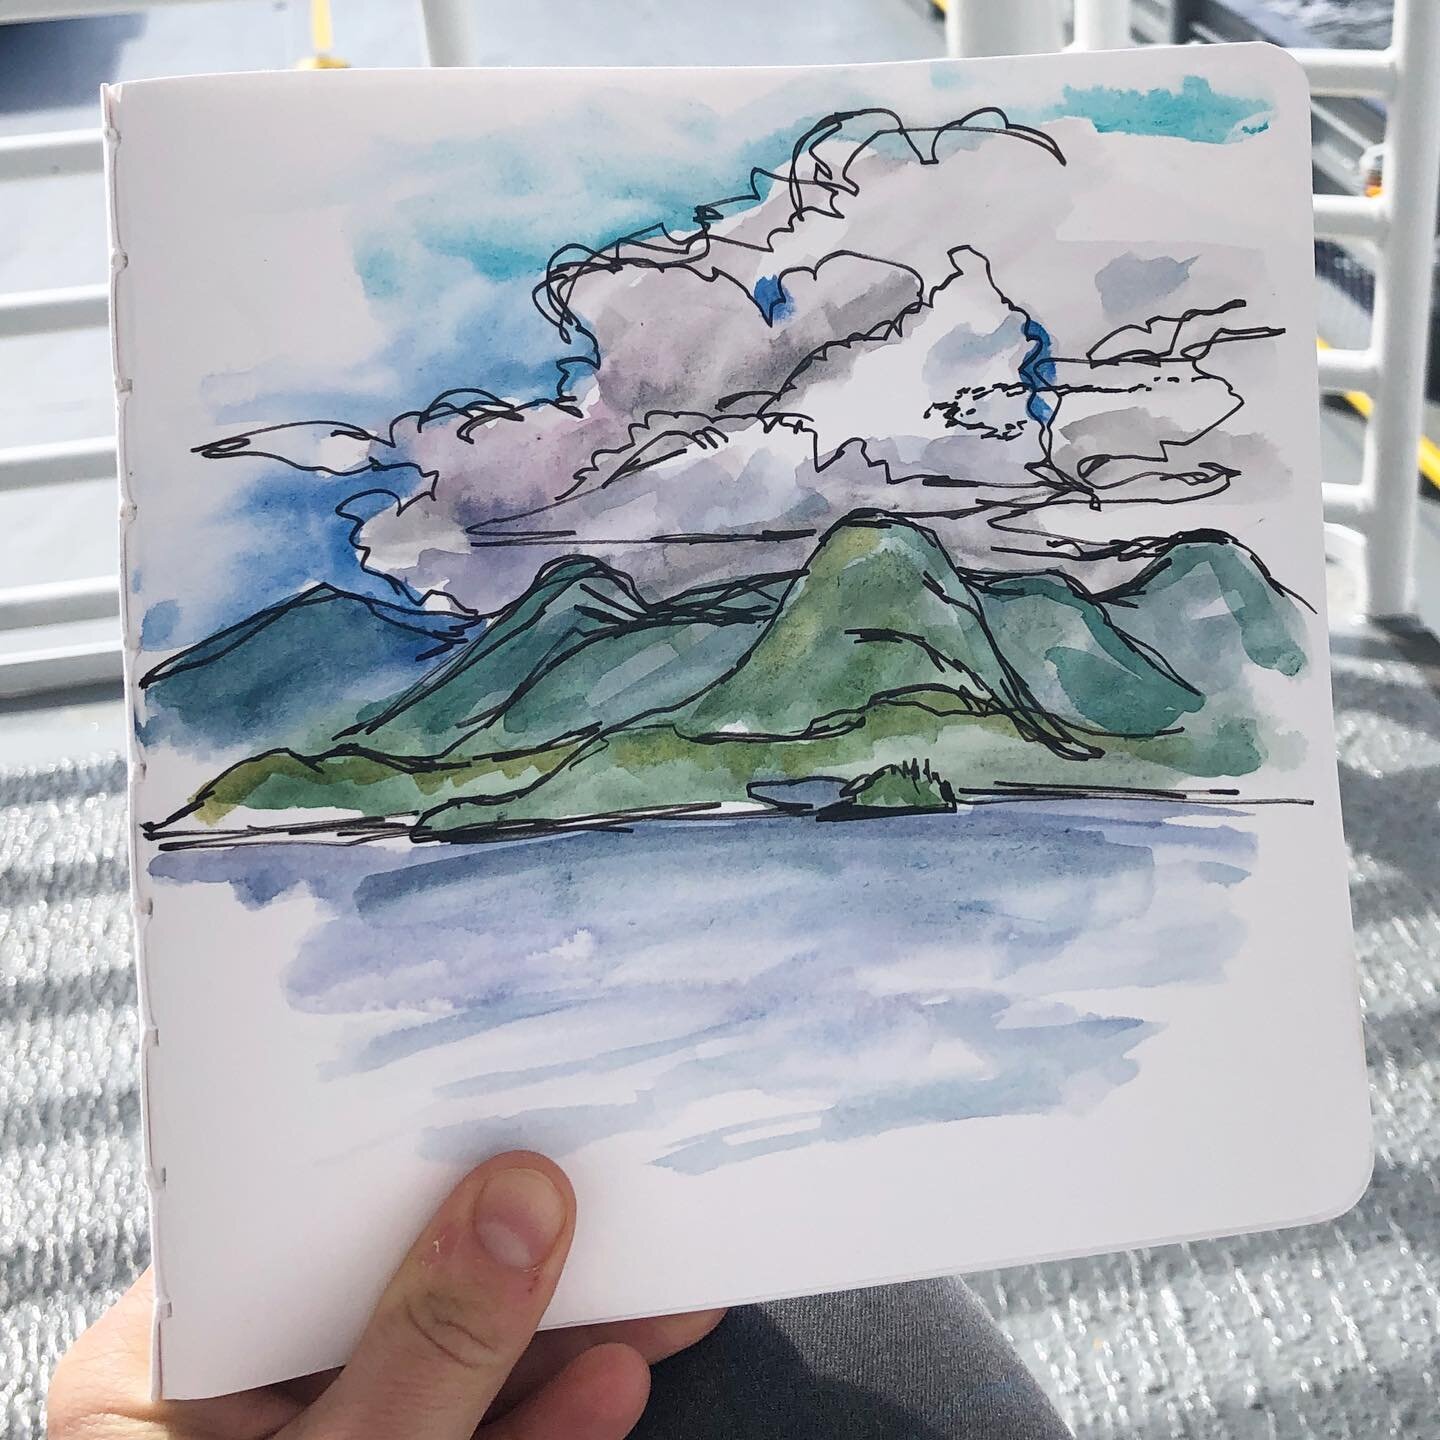 The ferry ride between Metlakatla and Ketchikan is 40minutes and the boat keeps moving. Made this quick sketch sitting outside looking back towards Annette Island. In 10 minutes the view was almost all gone. The weather is mostly clear today but the 